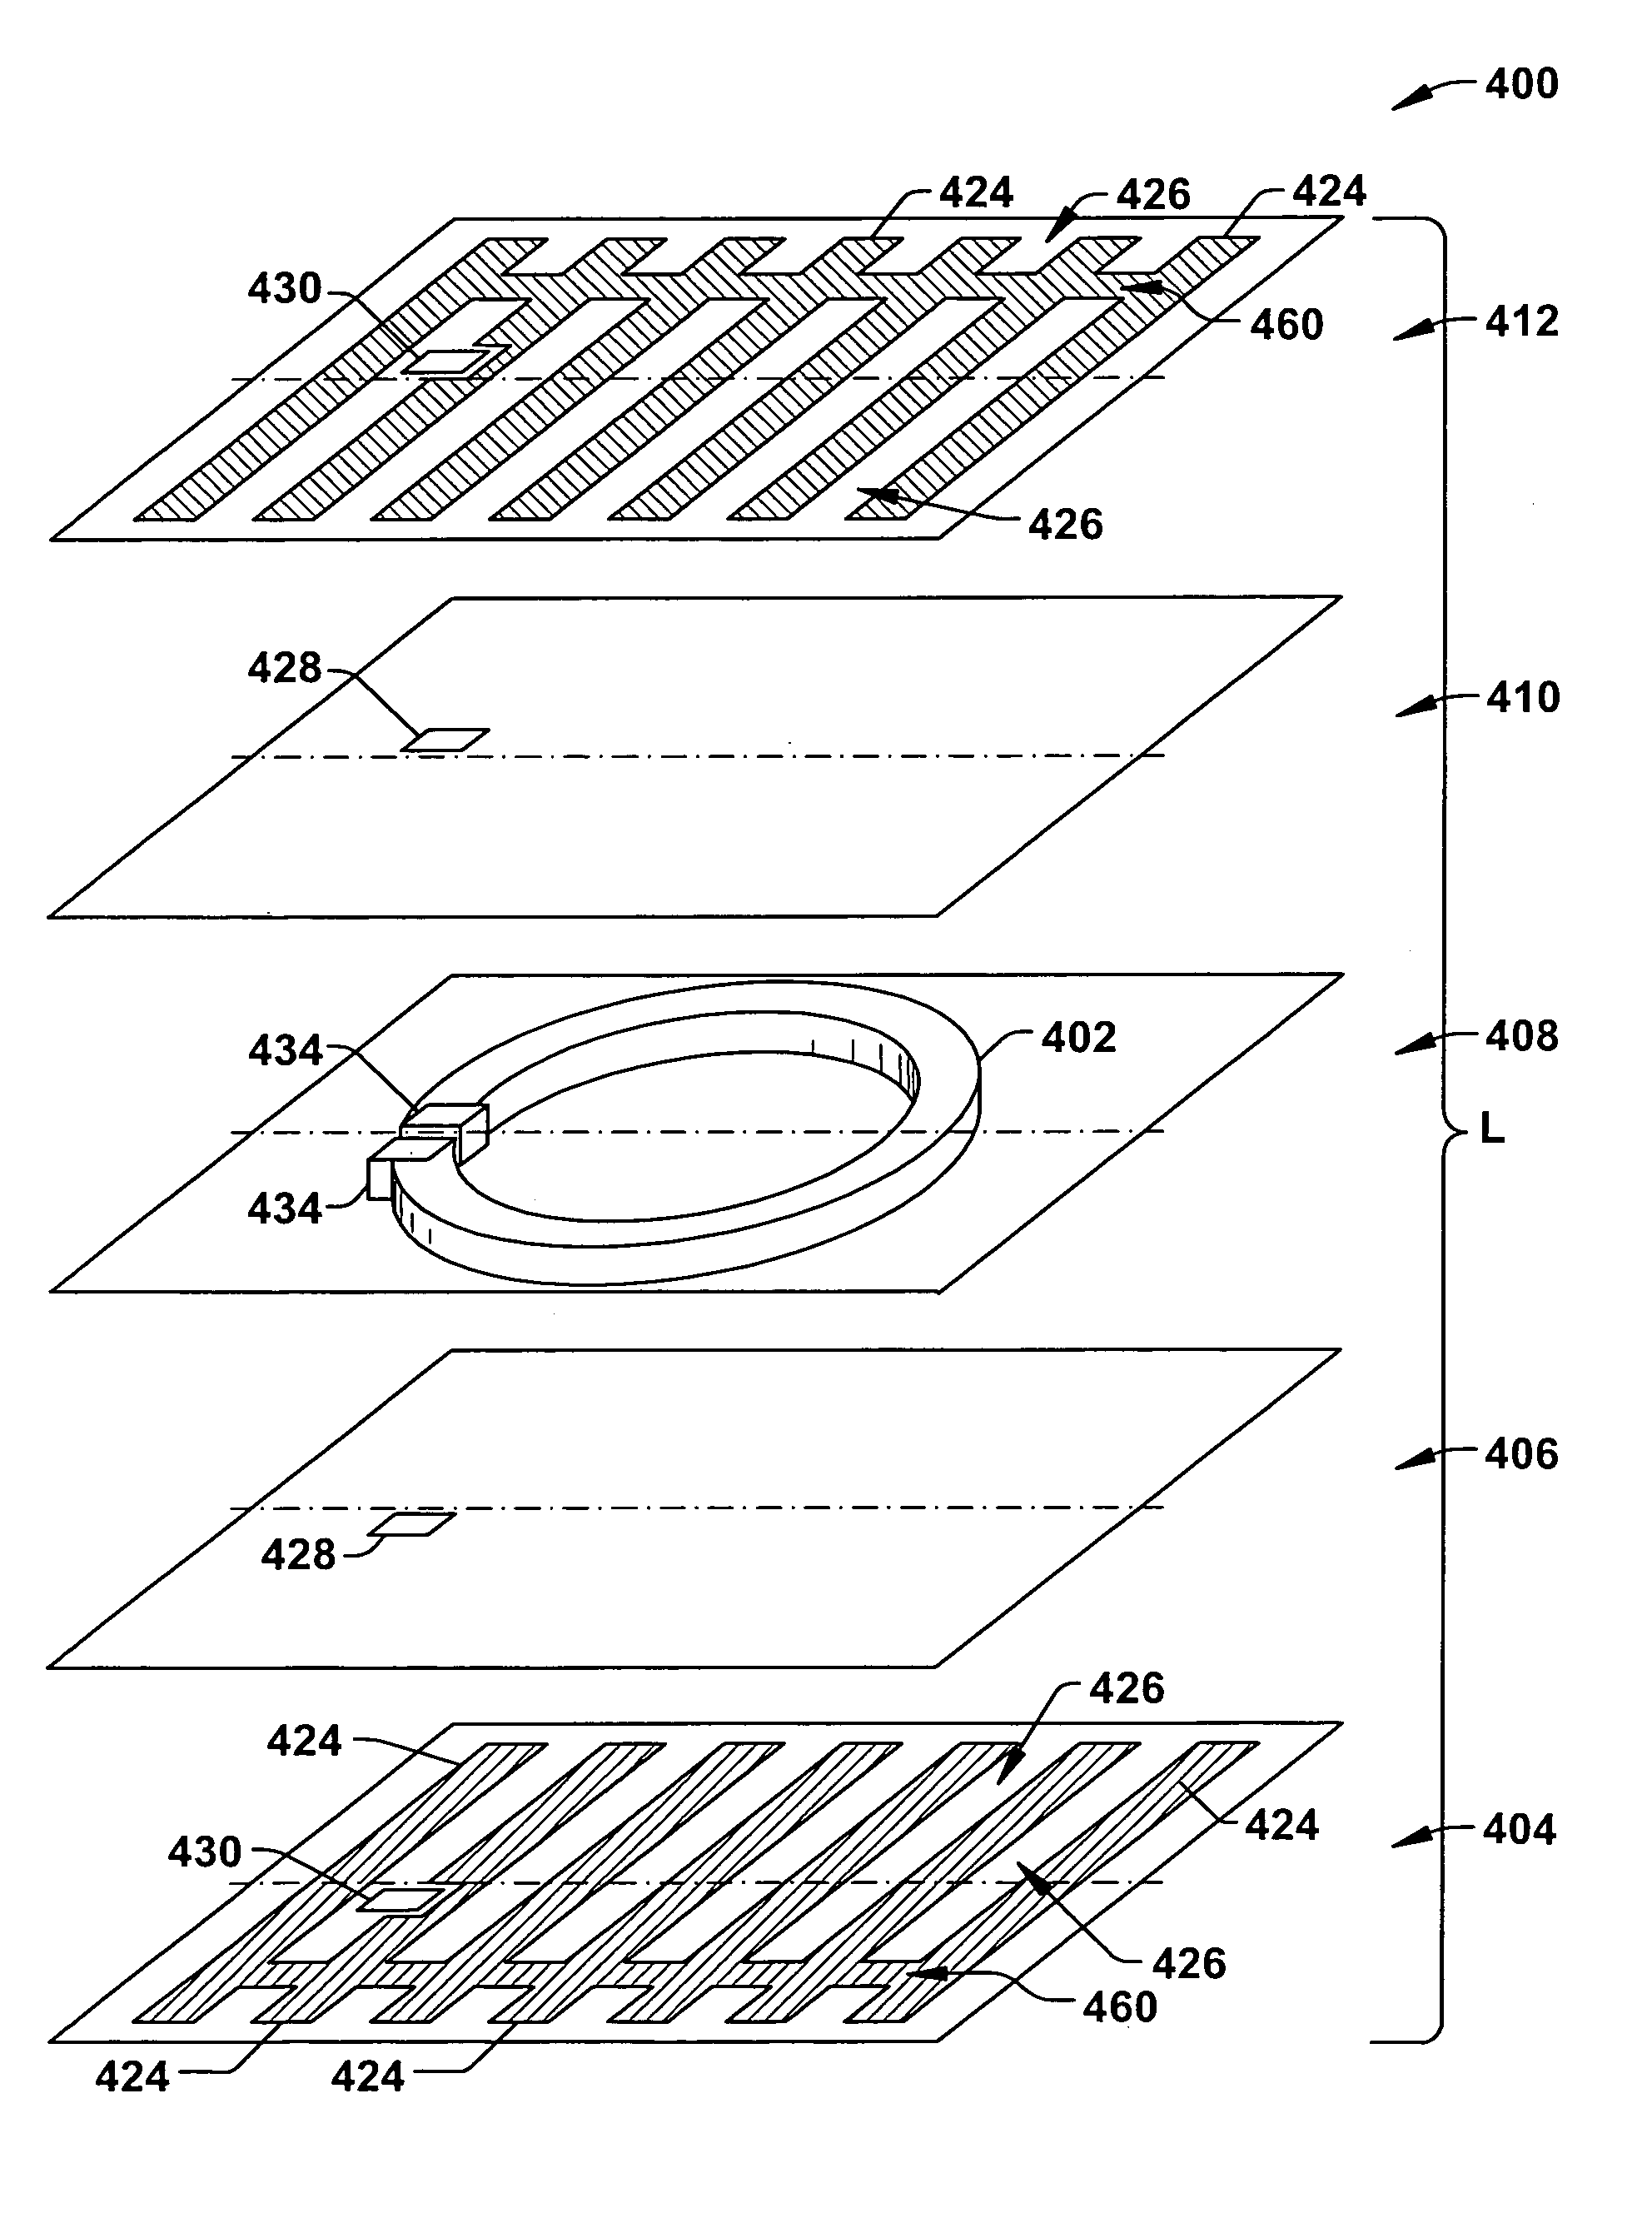 Method to improve inductance with a high-permeability slotted plate core in an integrated circuit